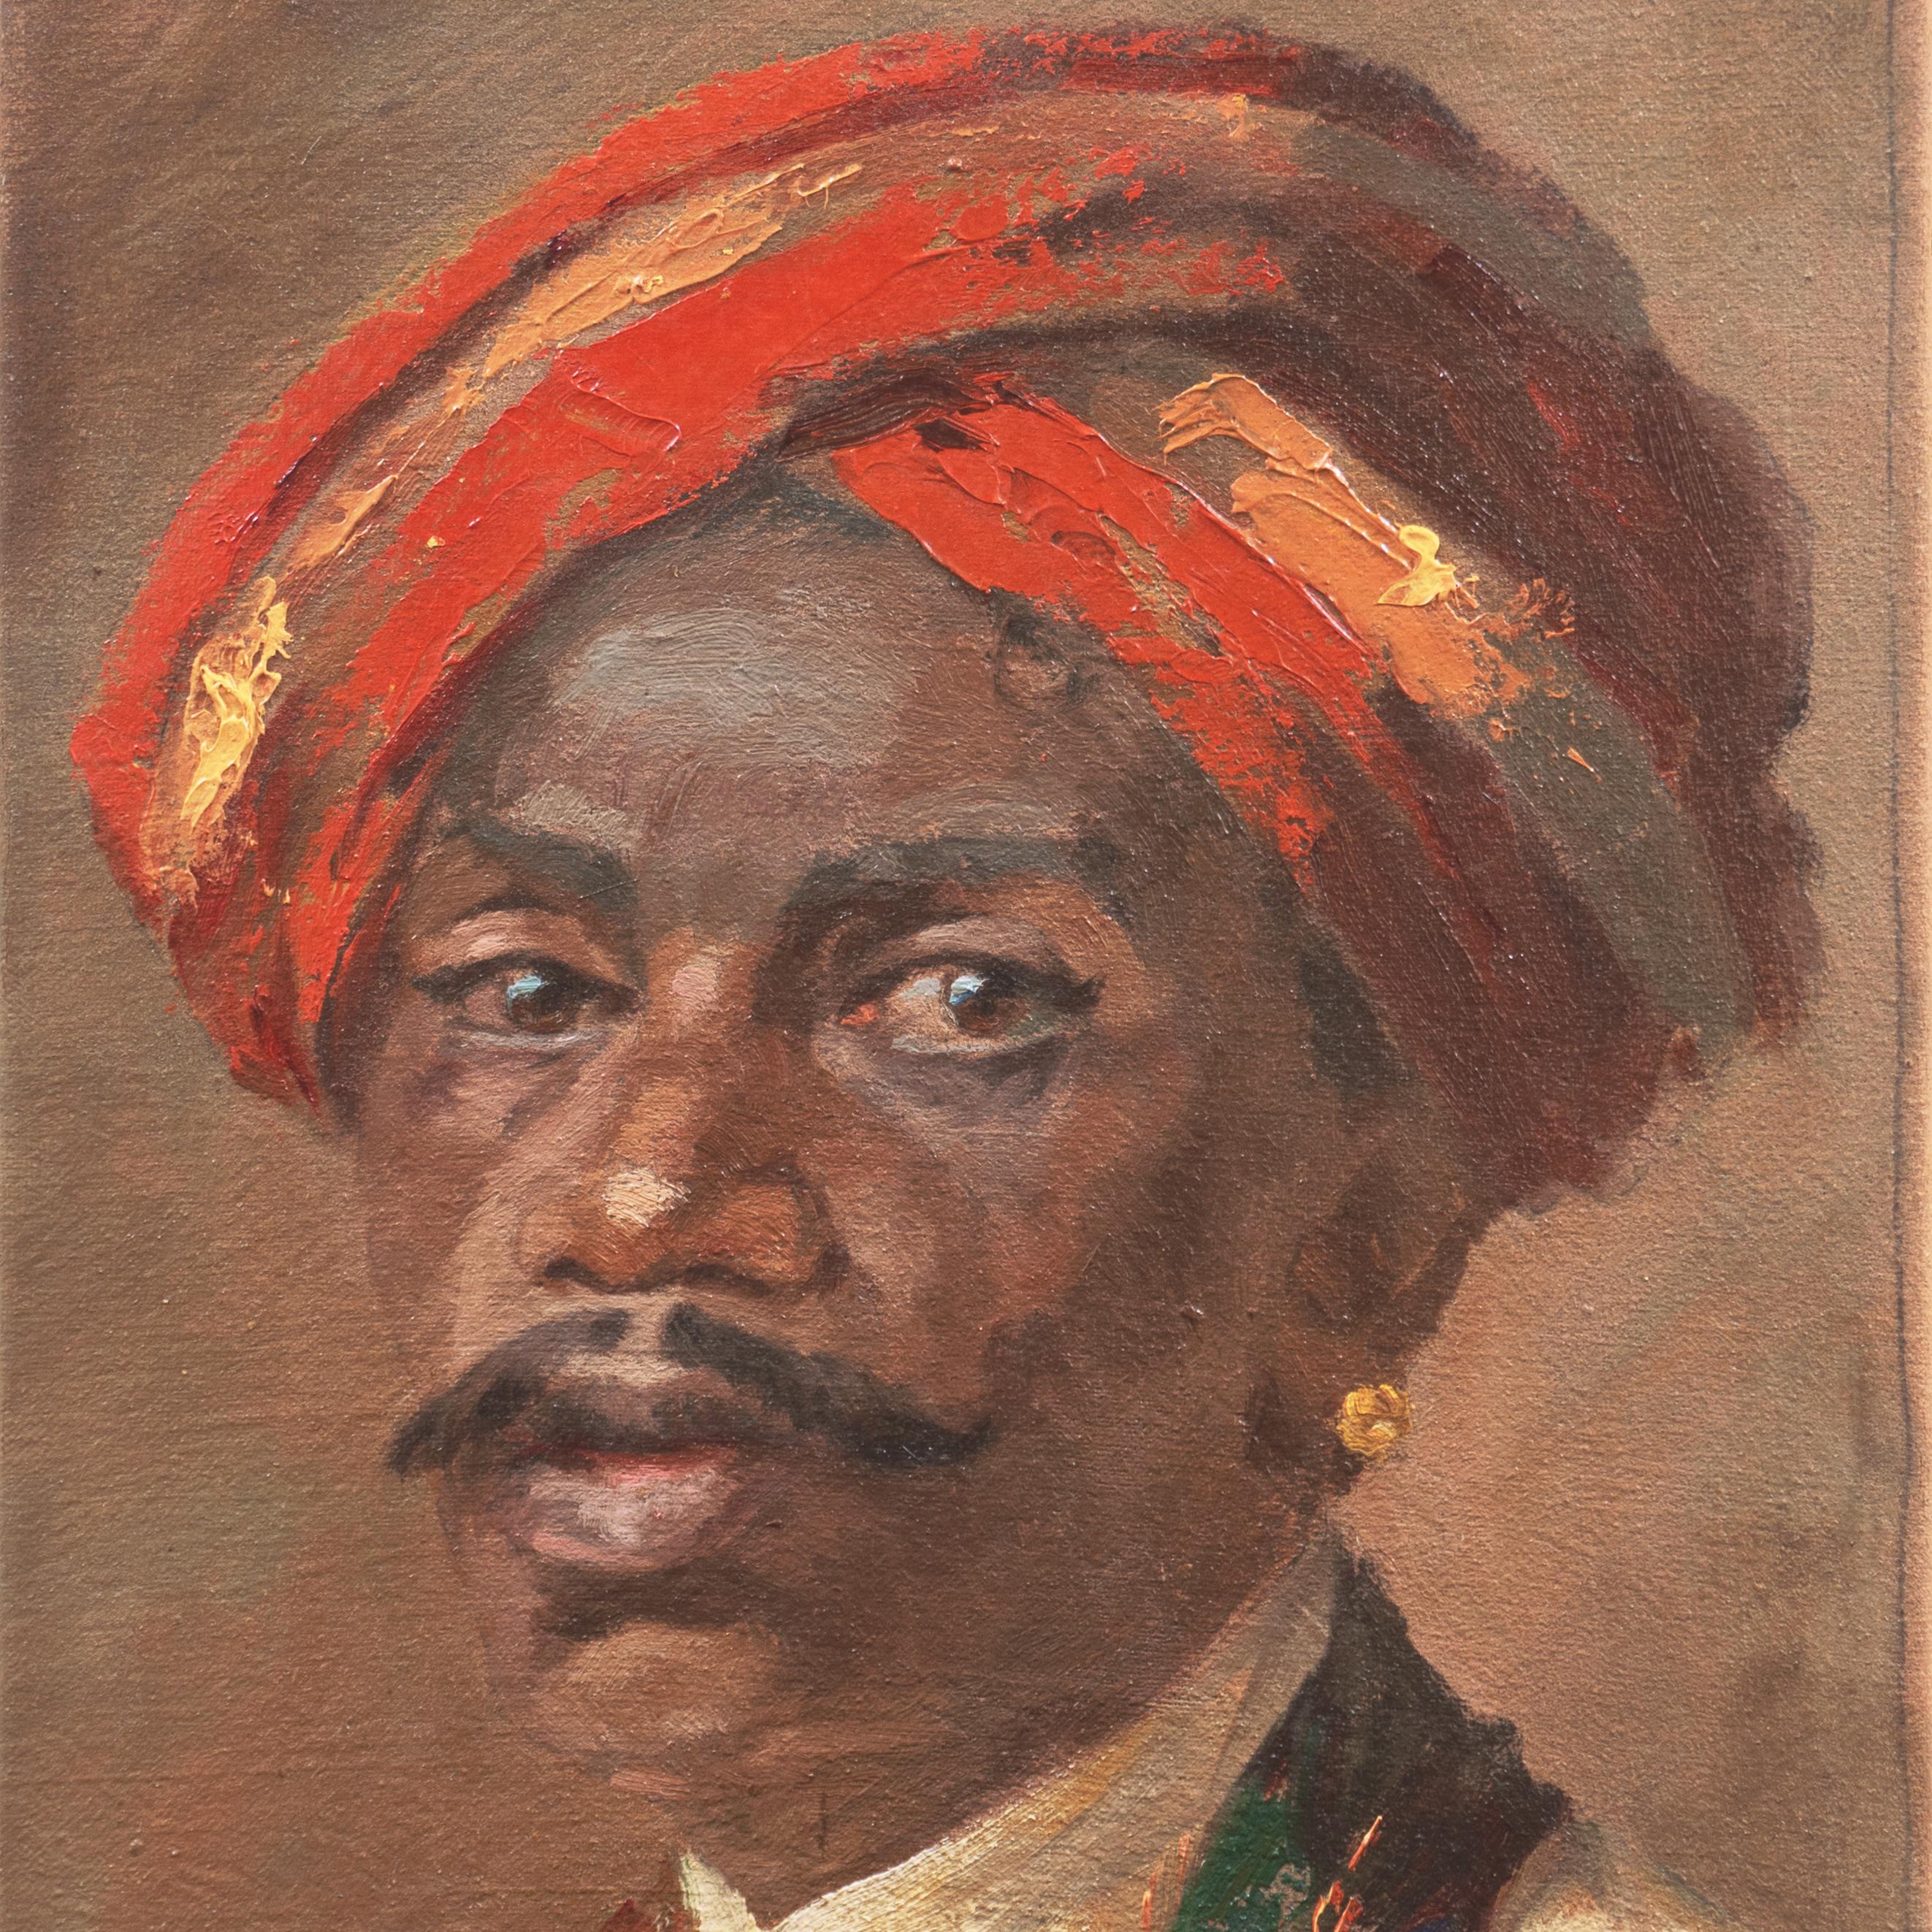 Signed lower left, 'Hugo V.P.' for Hugo Vilfred Pedersen (Danish, 1870-1959) and painted circa 1900.

An antique oil painting of an Indian gentleman wearing a saffron and coral turban and gold earring, shown gazing towards the viewer with quiet and